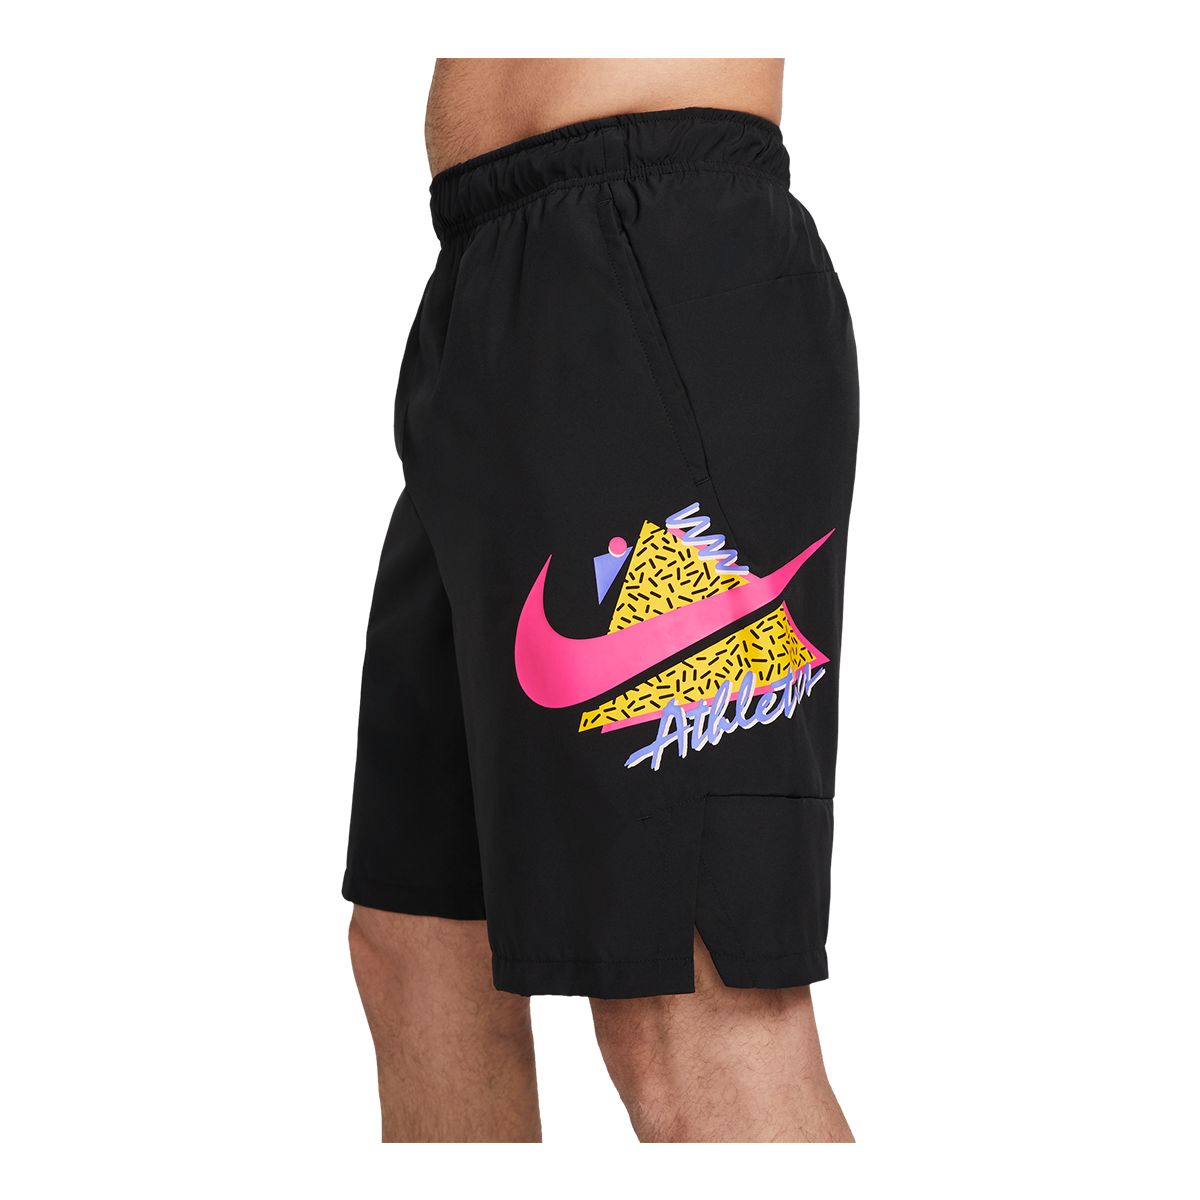 🏃🏻‍♀️ LOOK! These active woven shorts from Member's Mark are a